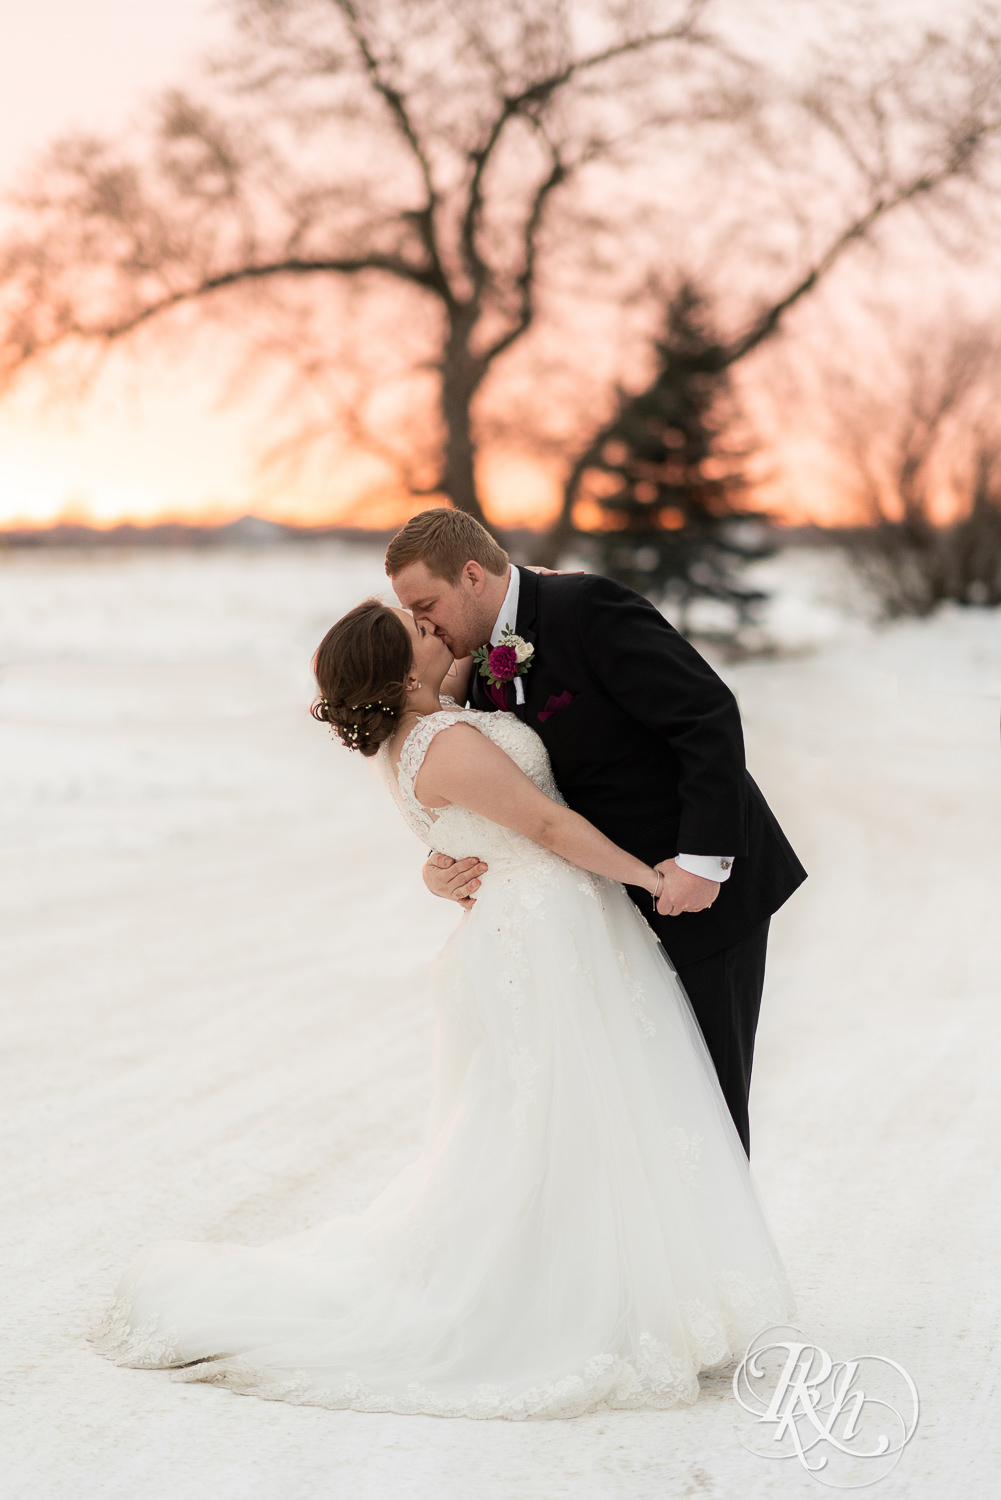 Bride and groom kissing at sunset in snow at Glenhaven Events in Farmington, Minnesota.